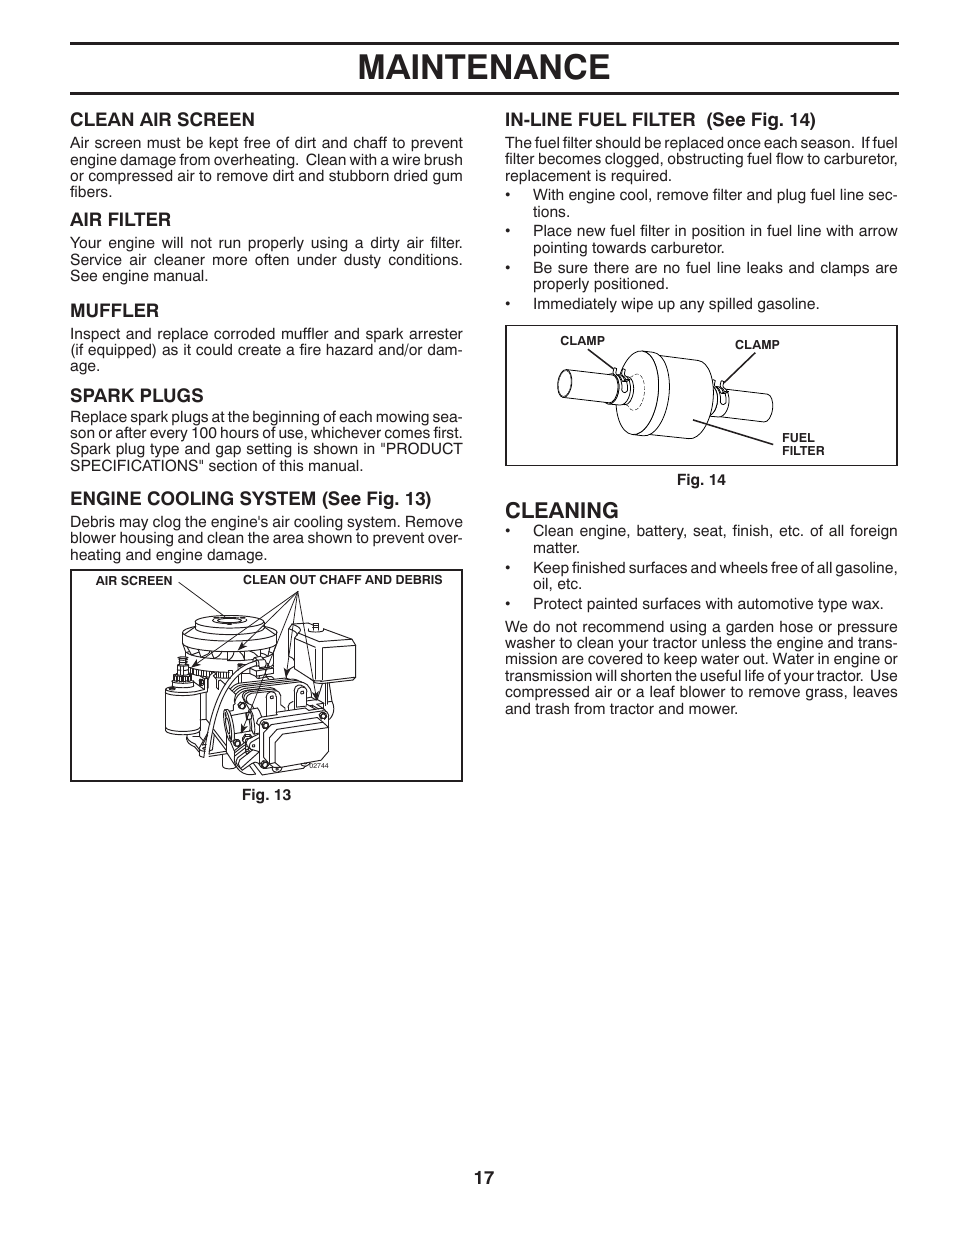 Maintenance, Cleaning | Poulan Pro PB17542LT LAWN TRACTOR User Manual